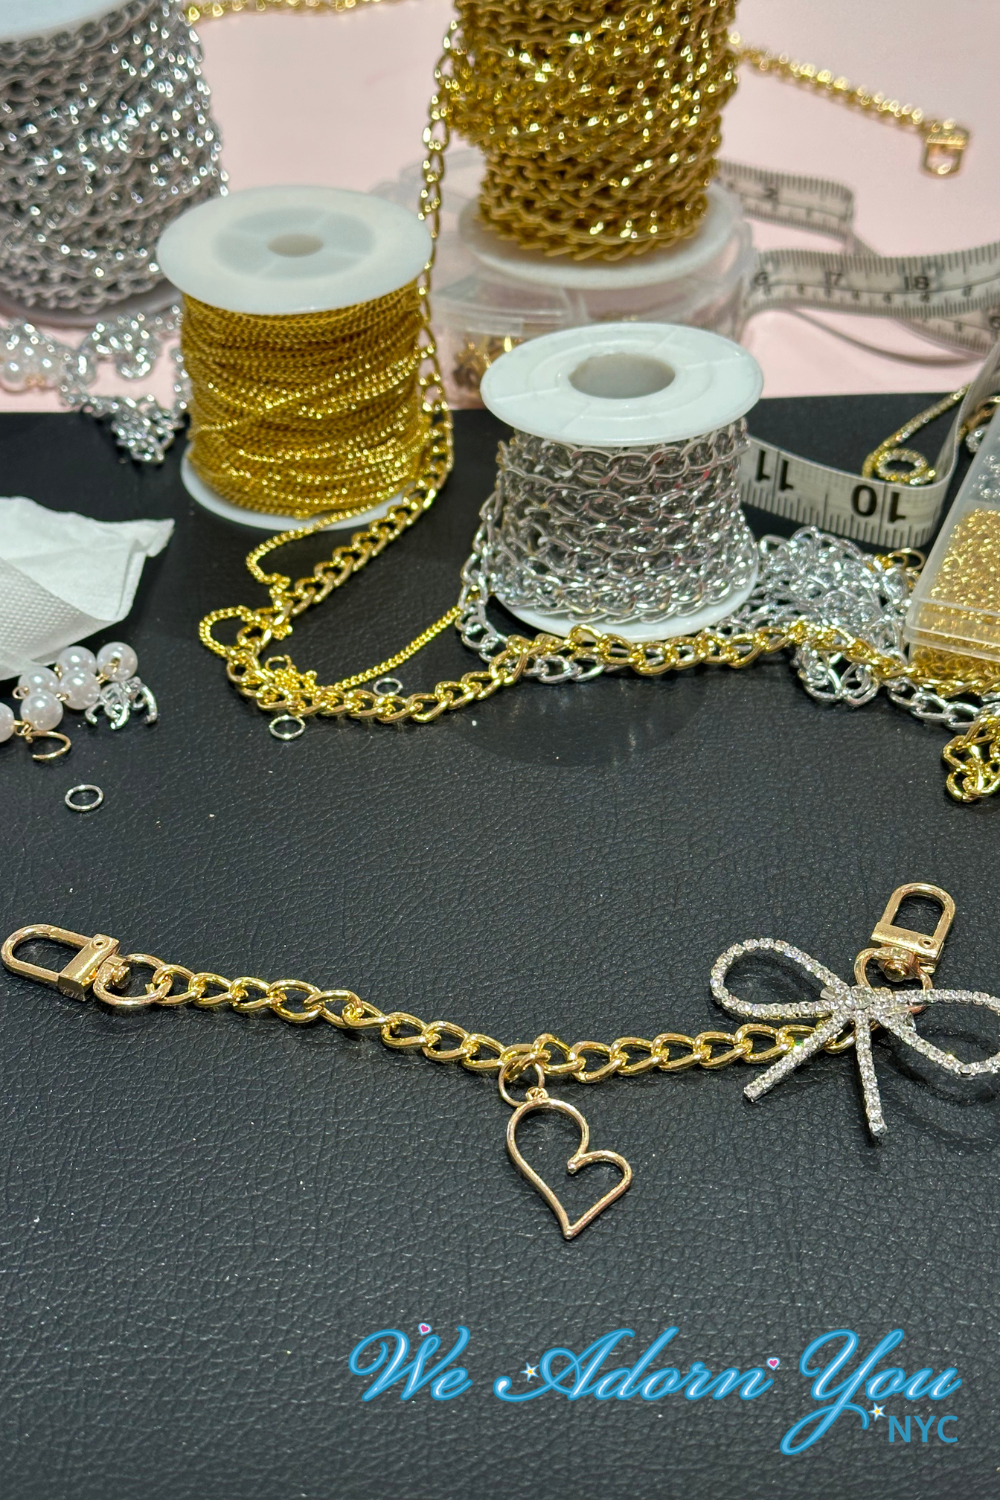 Personalized Charm Bracelet for Party Event NYC Near me Soho 10013.png